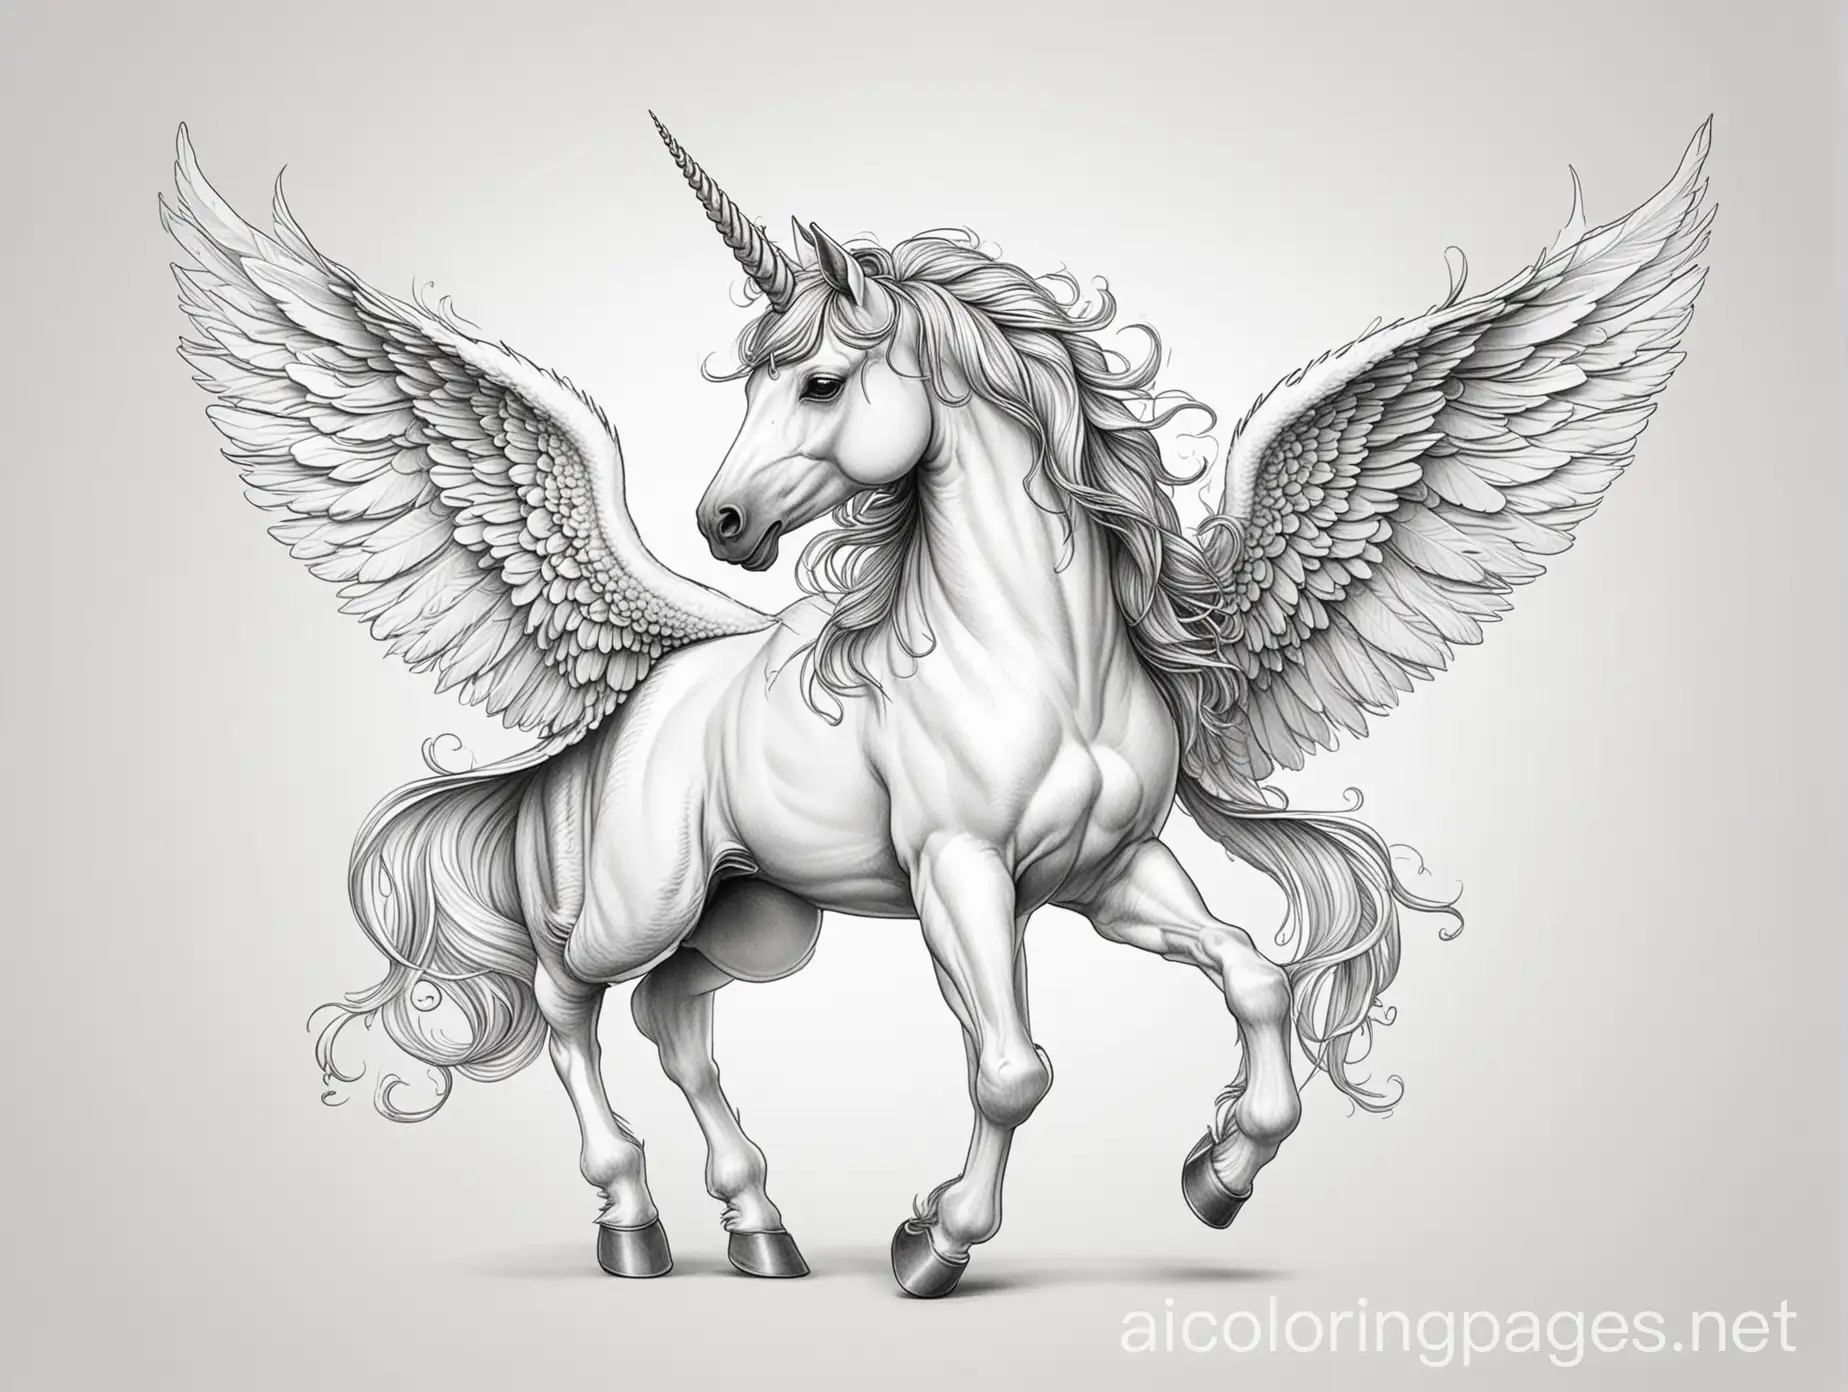 Flying-Unicorn-Coloring-Page-Simple-Line-Art-on-White-Background